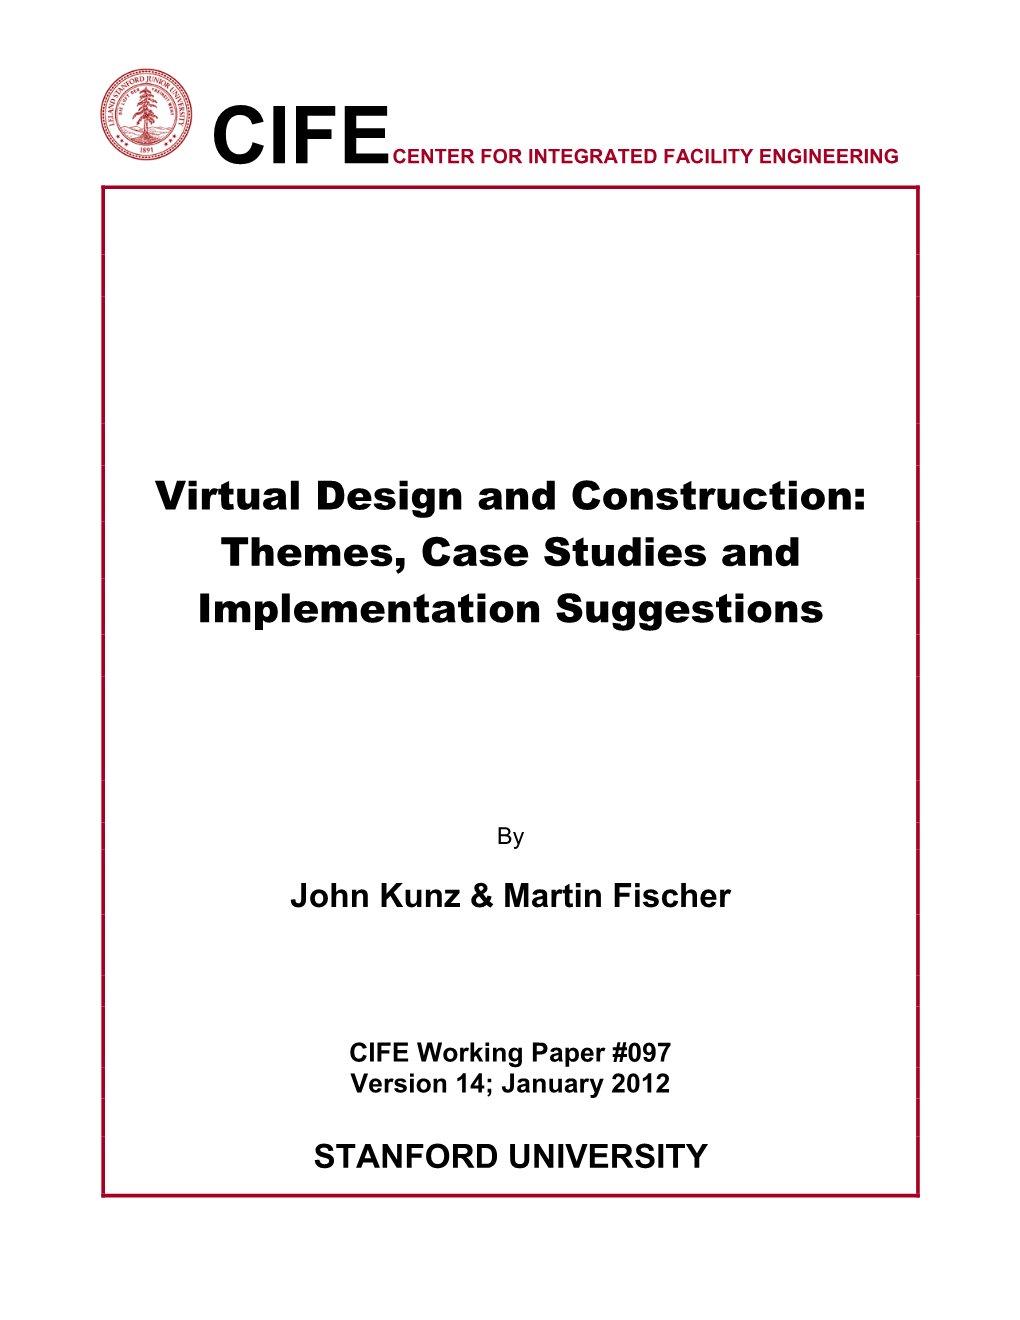 Virtual Design and Construction: Themes, Case Studies and Implementation Suggestions